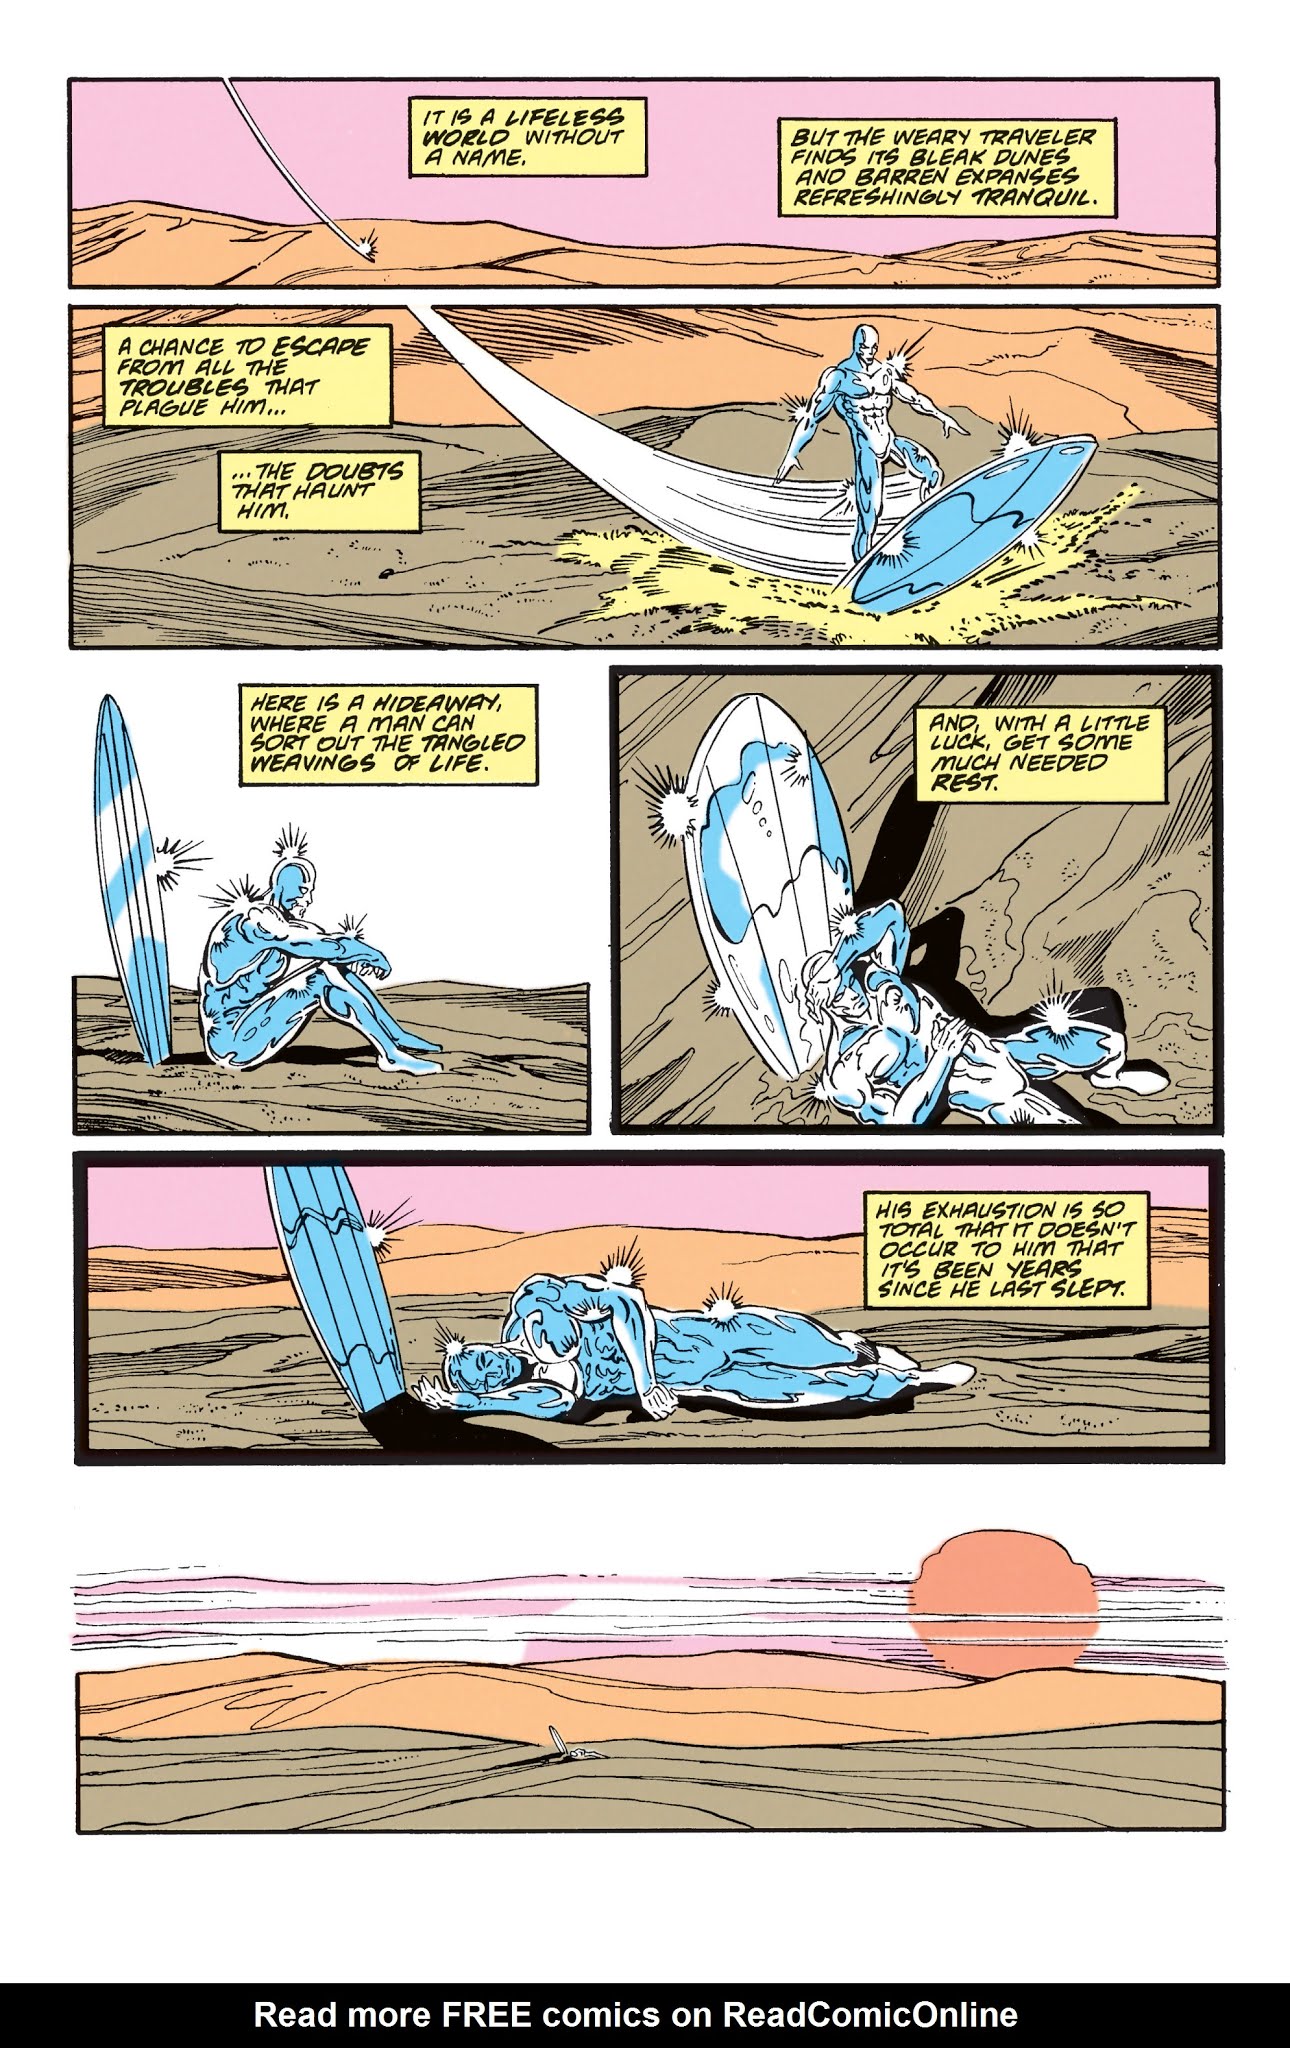 Read online Silver Surfer (1987) comic -  Issue # _TPB Silver Surfer - Rebirth of Thanos (Part 1) - 5